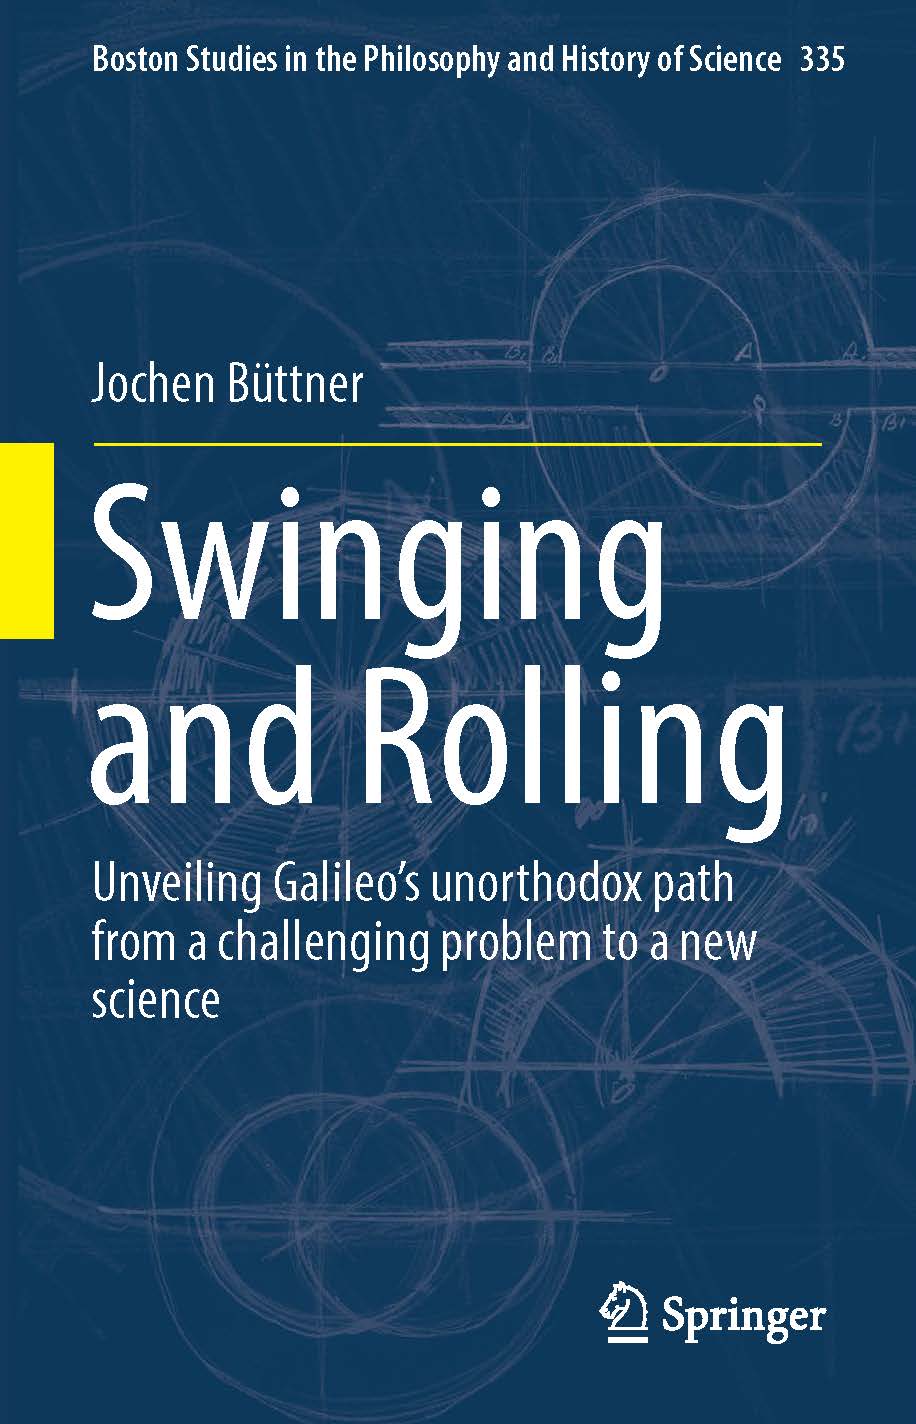 book cover: Jochen Büttner: Swinging and rolling. Unveiling Galileo's unorthodox path from a challenging problem to a new Science (2019)